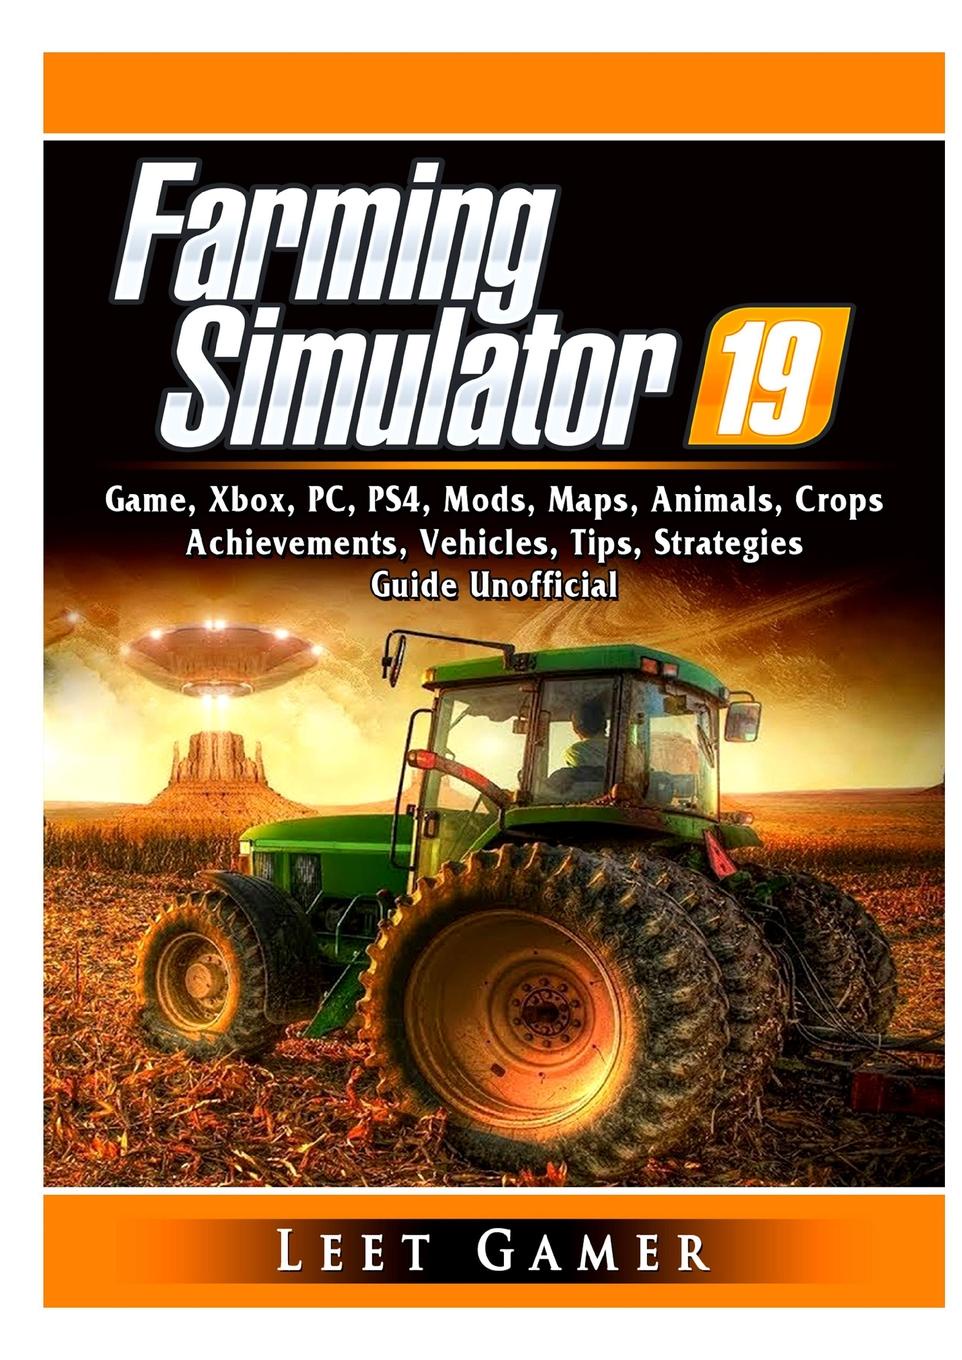 фото Farming Simulator 19 Game, Xbox, PC, PS4, Mods, Maps, Animals, Crops, Achievements, Vehicles, Tips, Strategies, Guide Unofficial